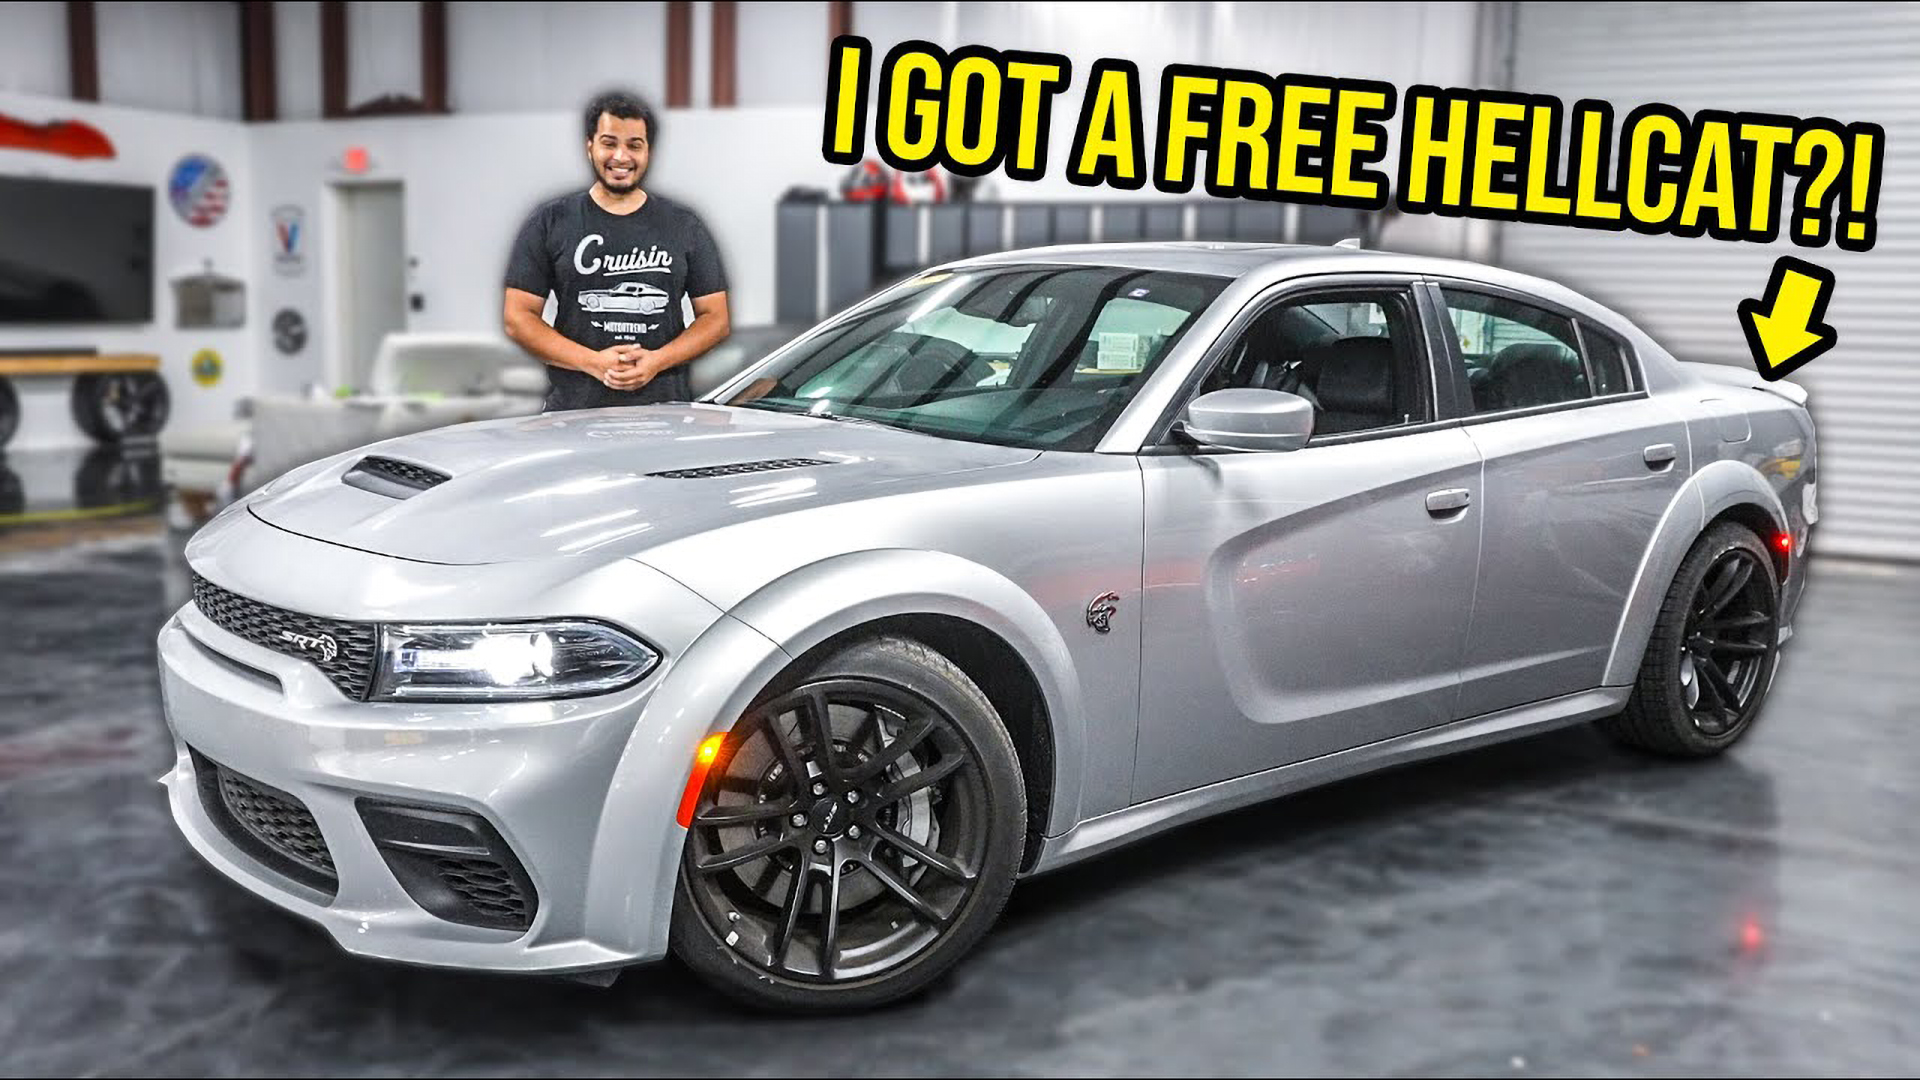 YouTuber "Tavarsh" standing next to a silver Dodge Charger Hellcat Redeye.